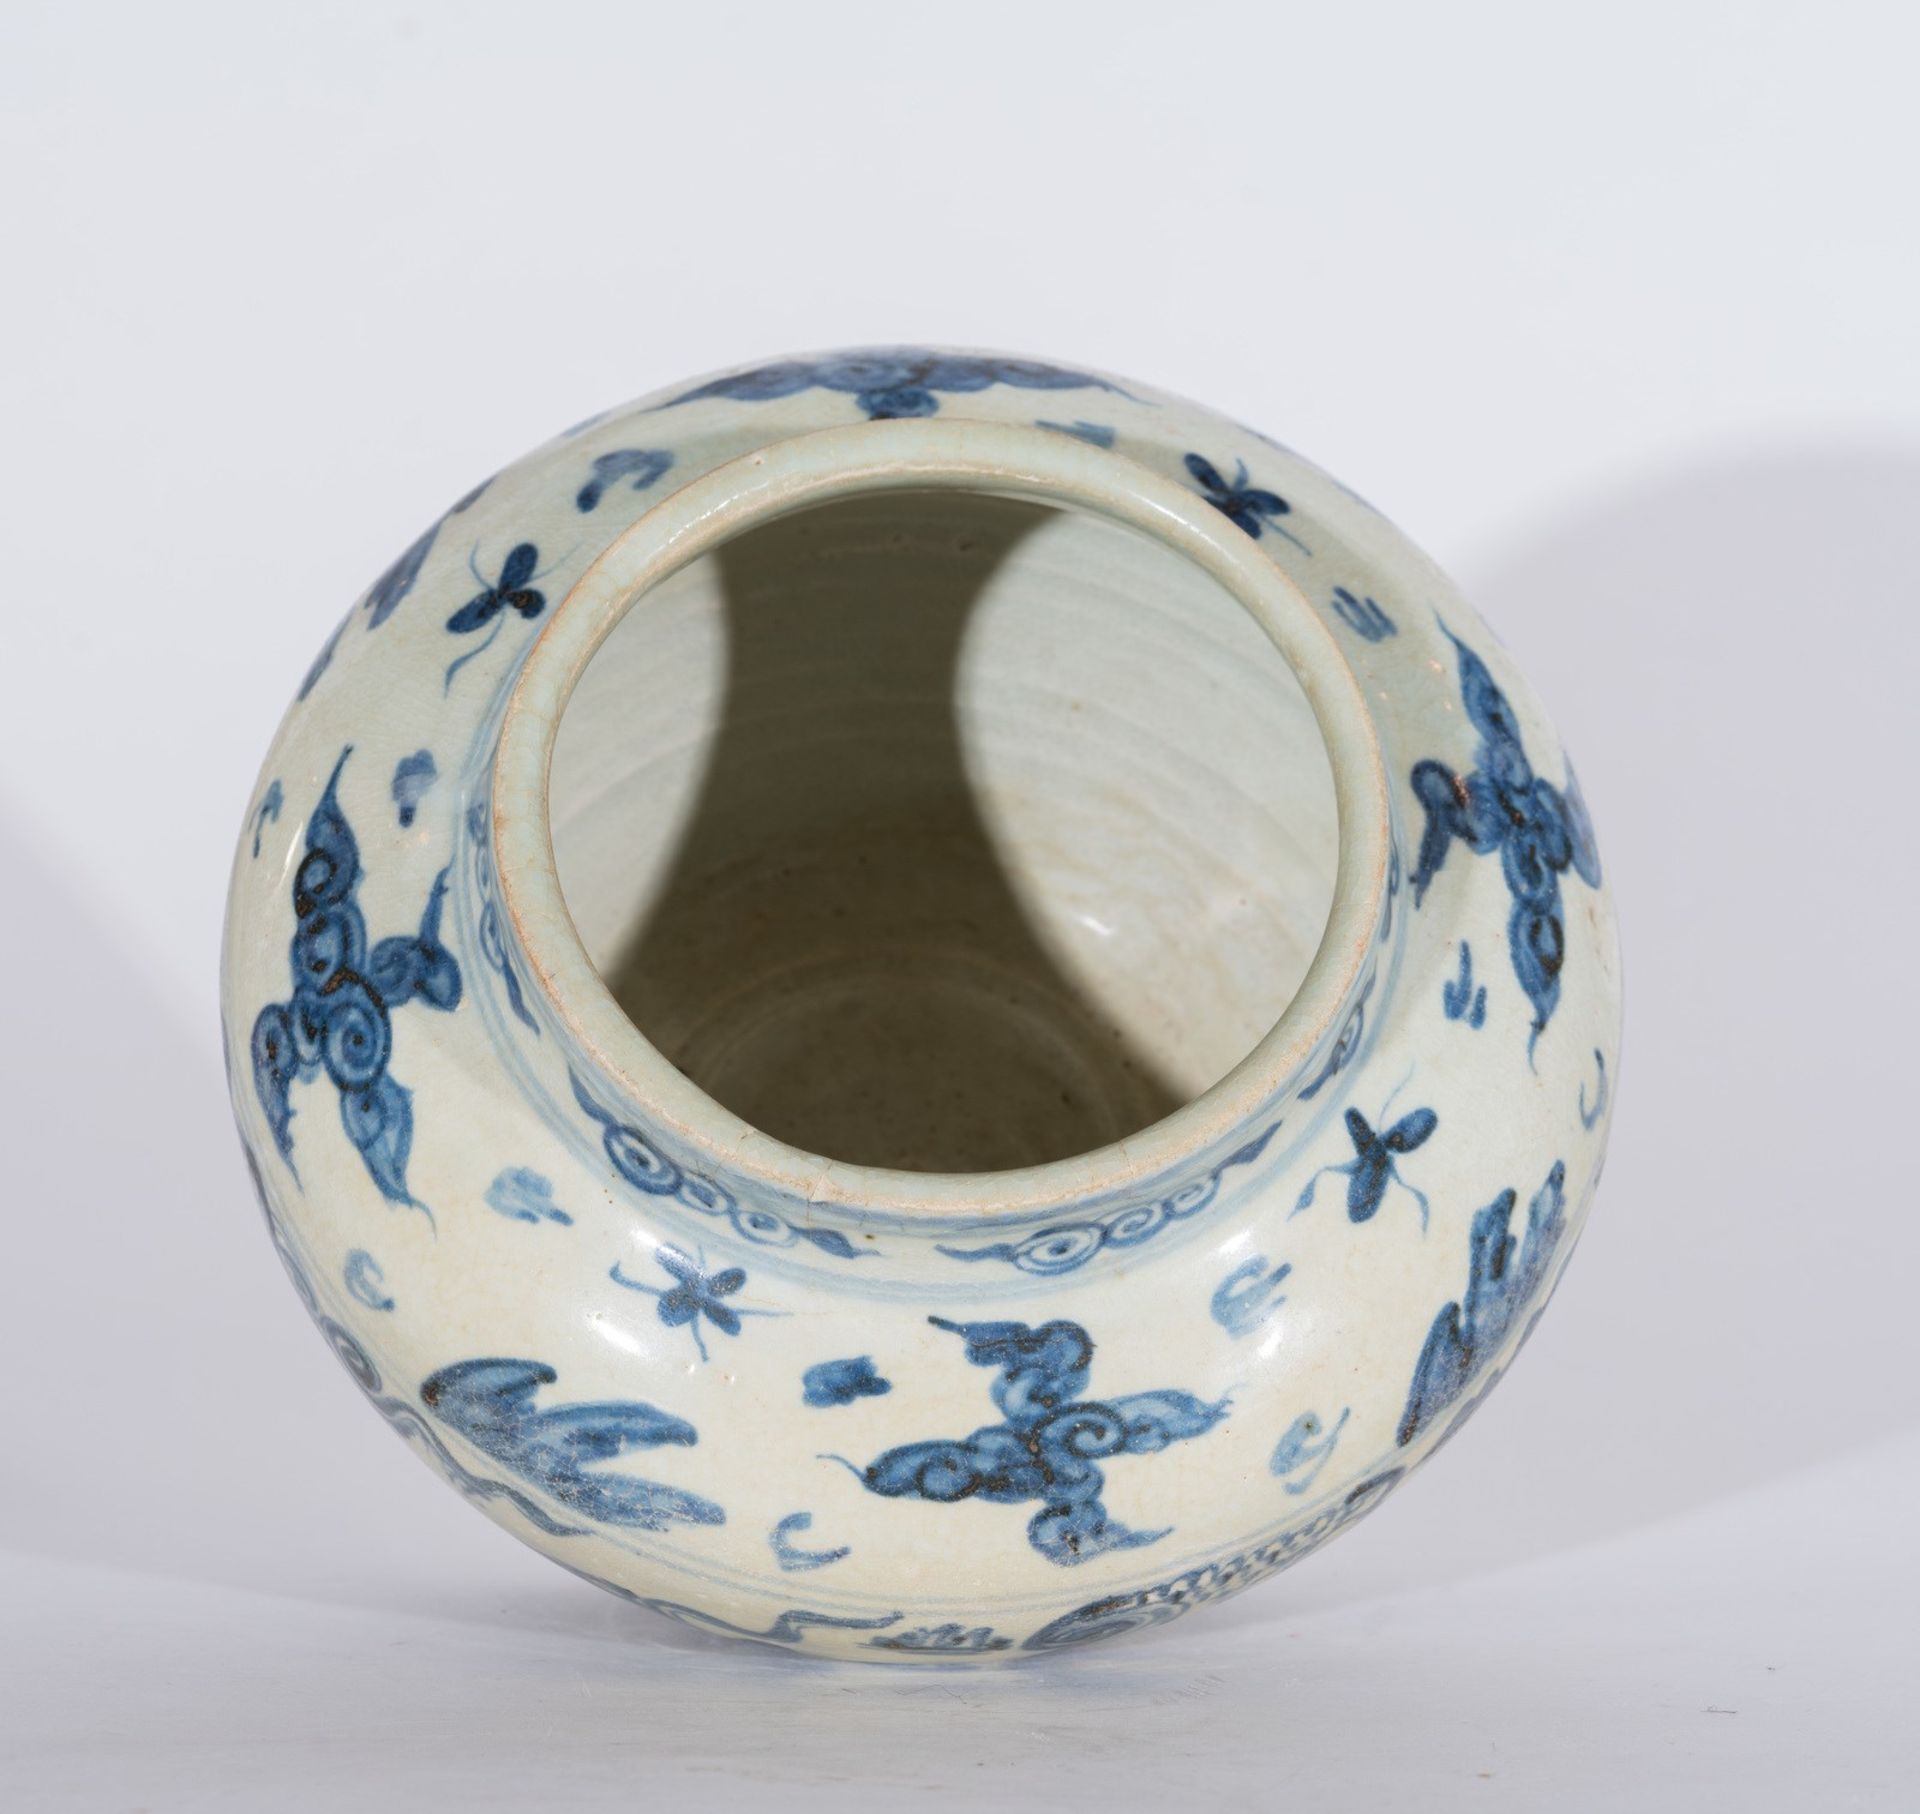 Arte Sud-Est Asiatico A blue and white pottery vase painted with vegetal motifs and clouds Vietnam, - Image 4 of 4